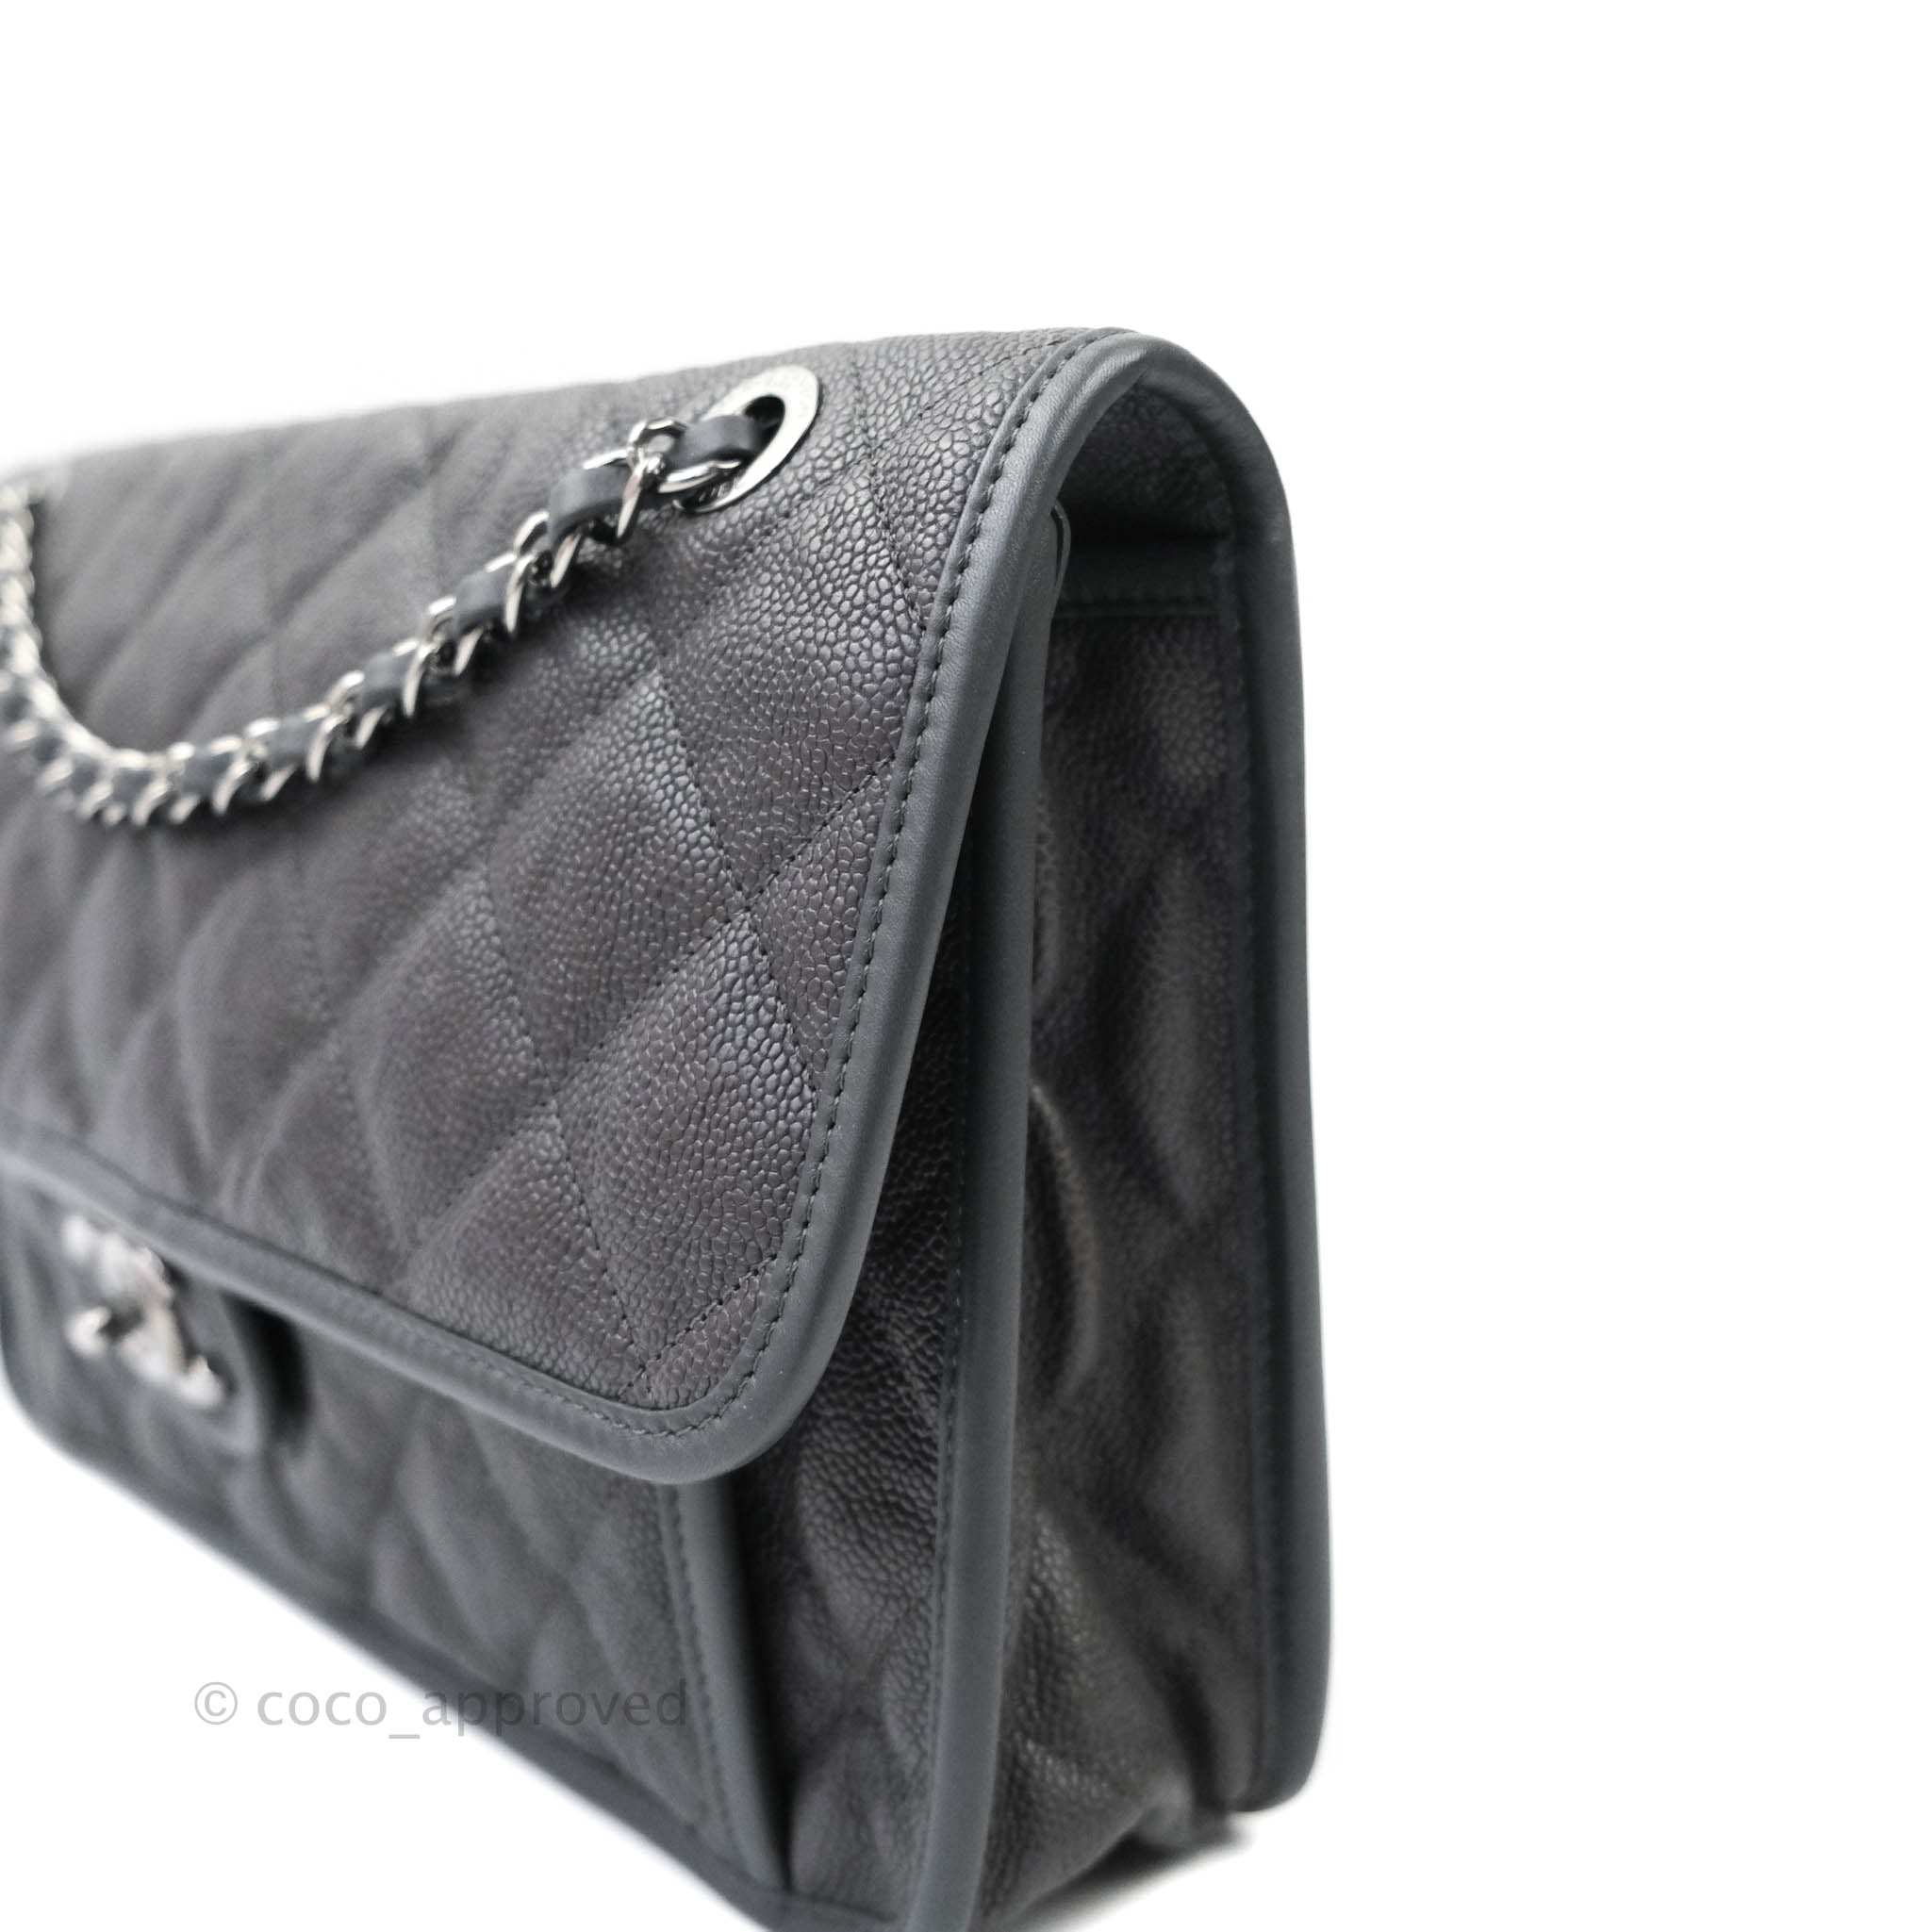 Chanel Black French Riviera Flap Bag Medium Quilted Caviar Leather